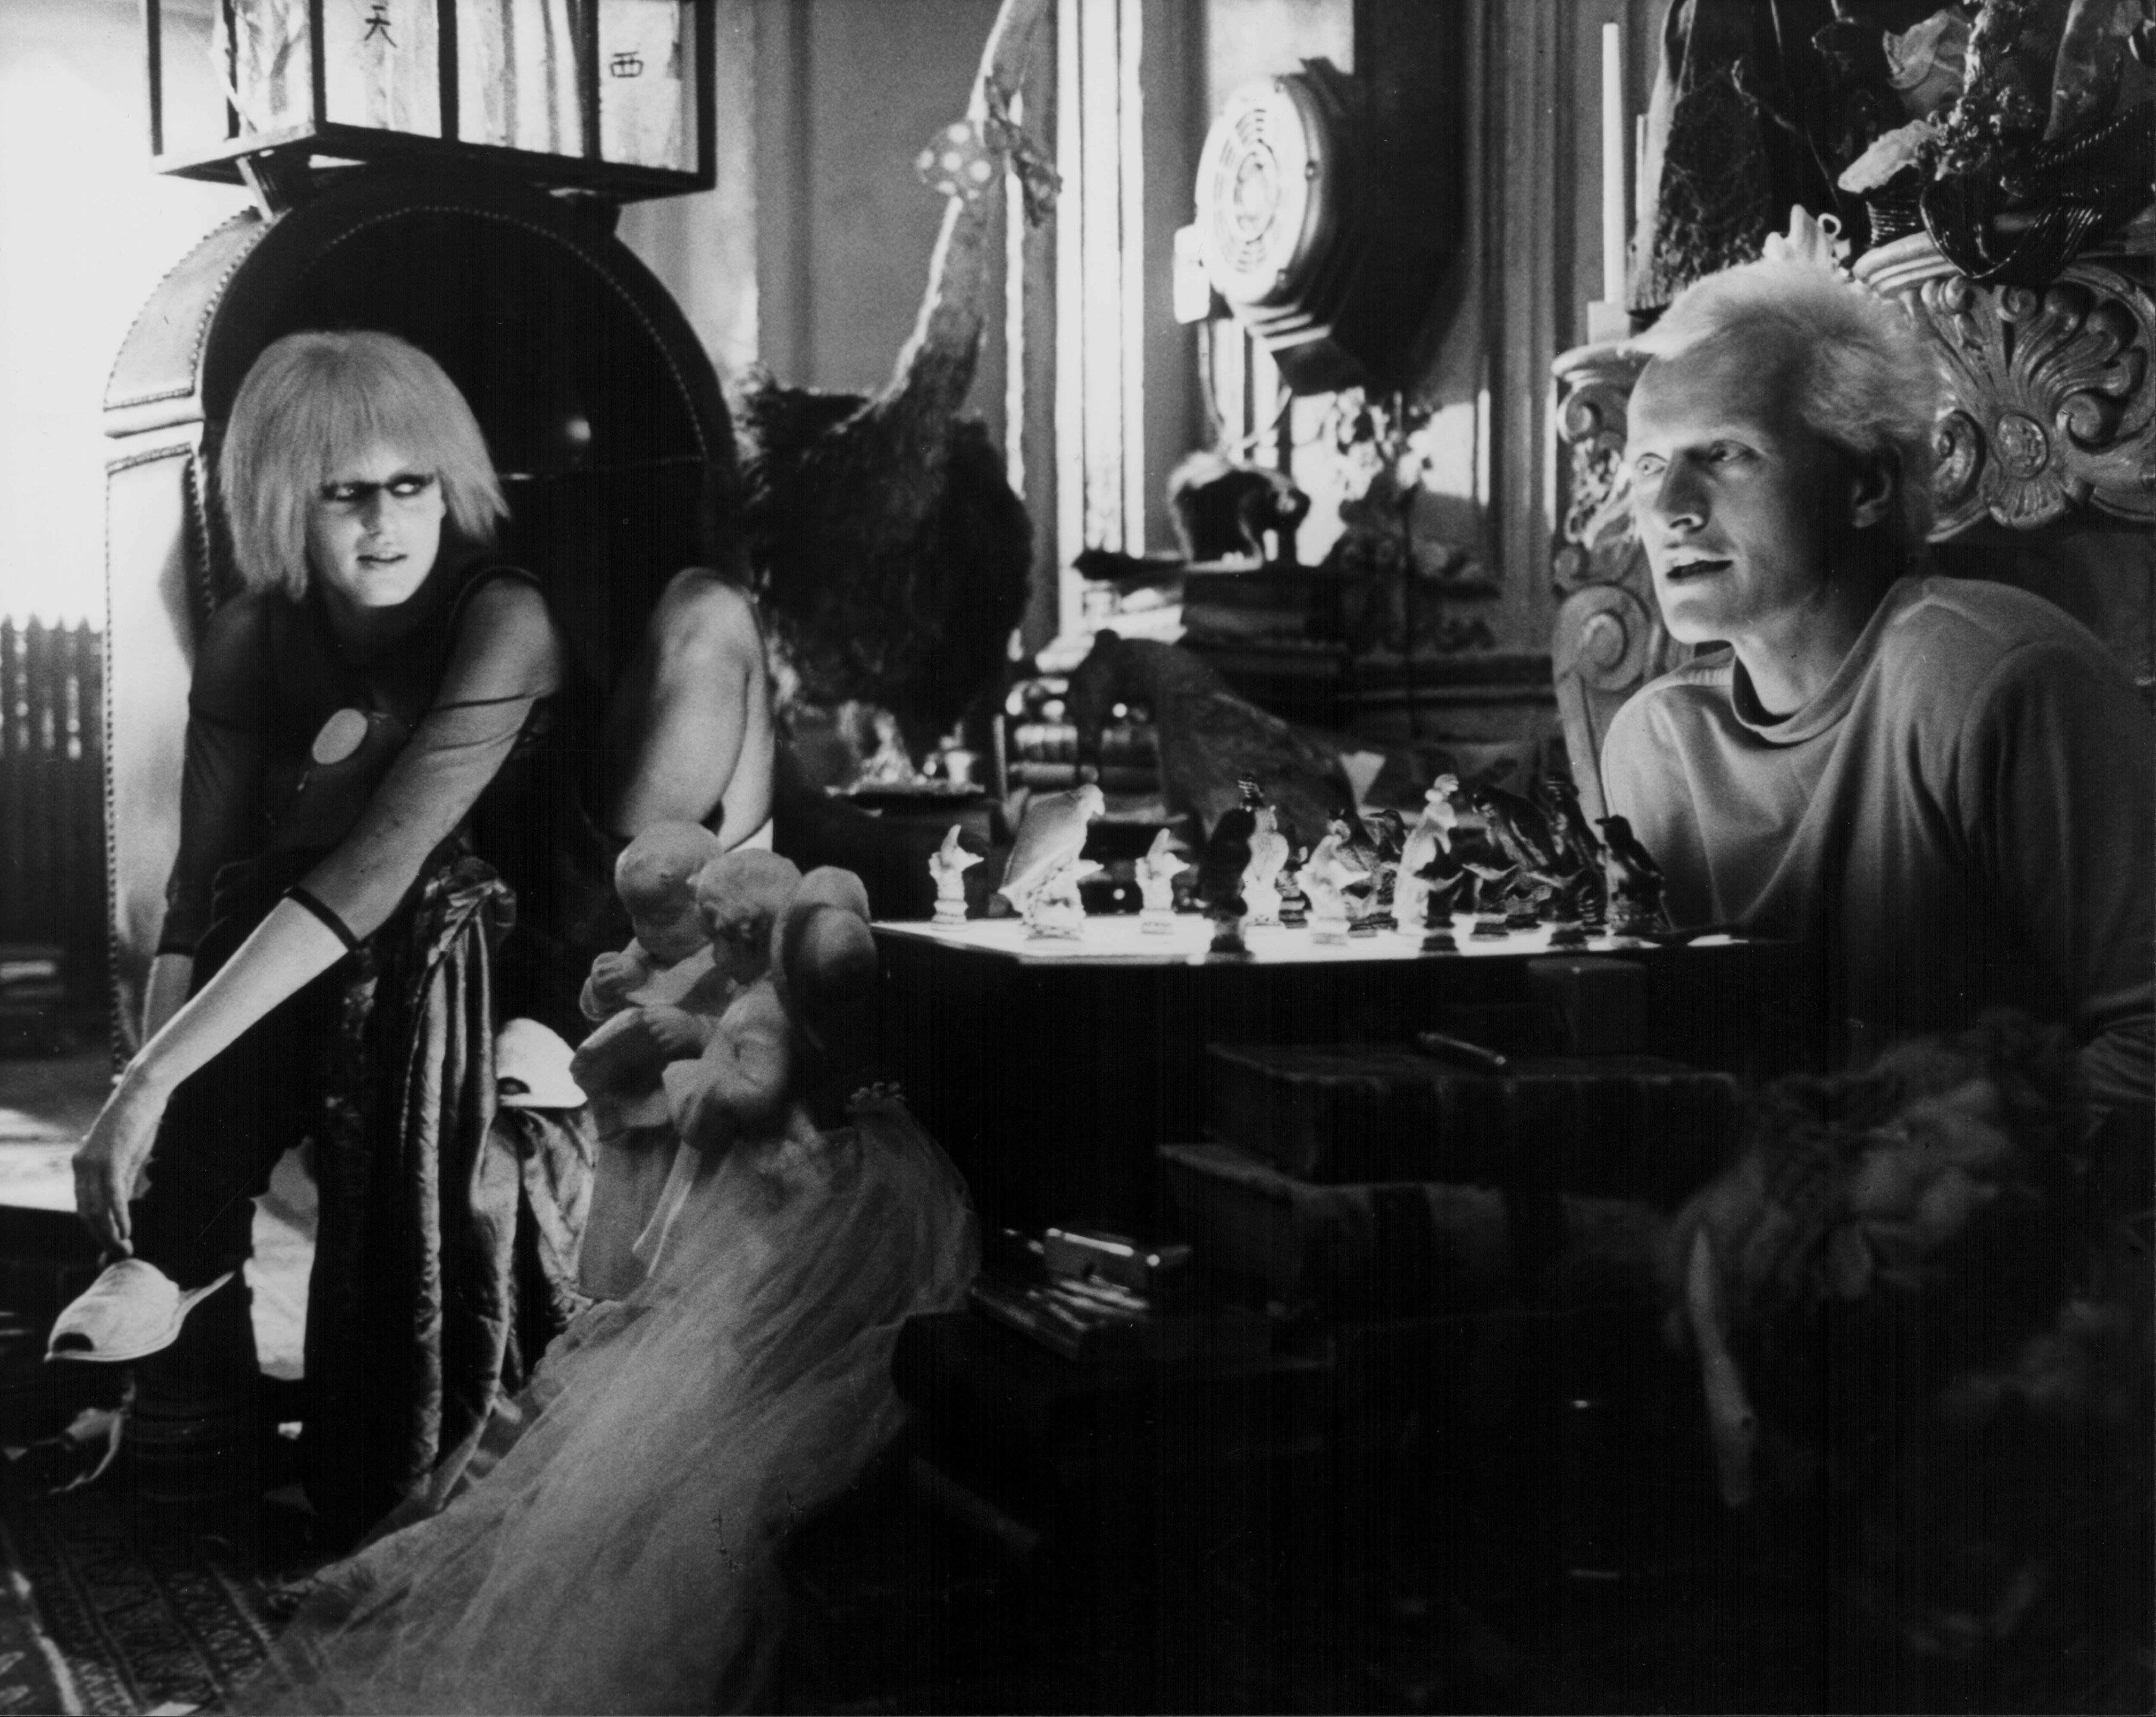 Daryl Hannah and Rutger Hauer in 'Blade Runner'